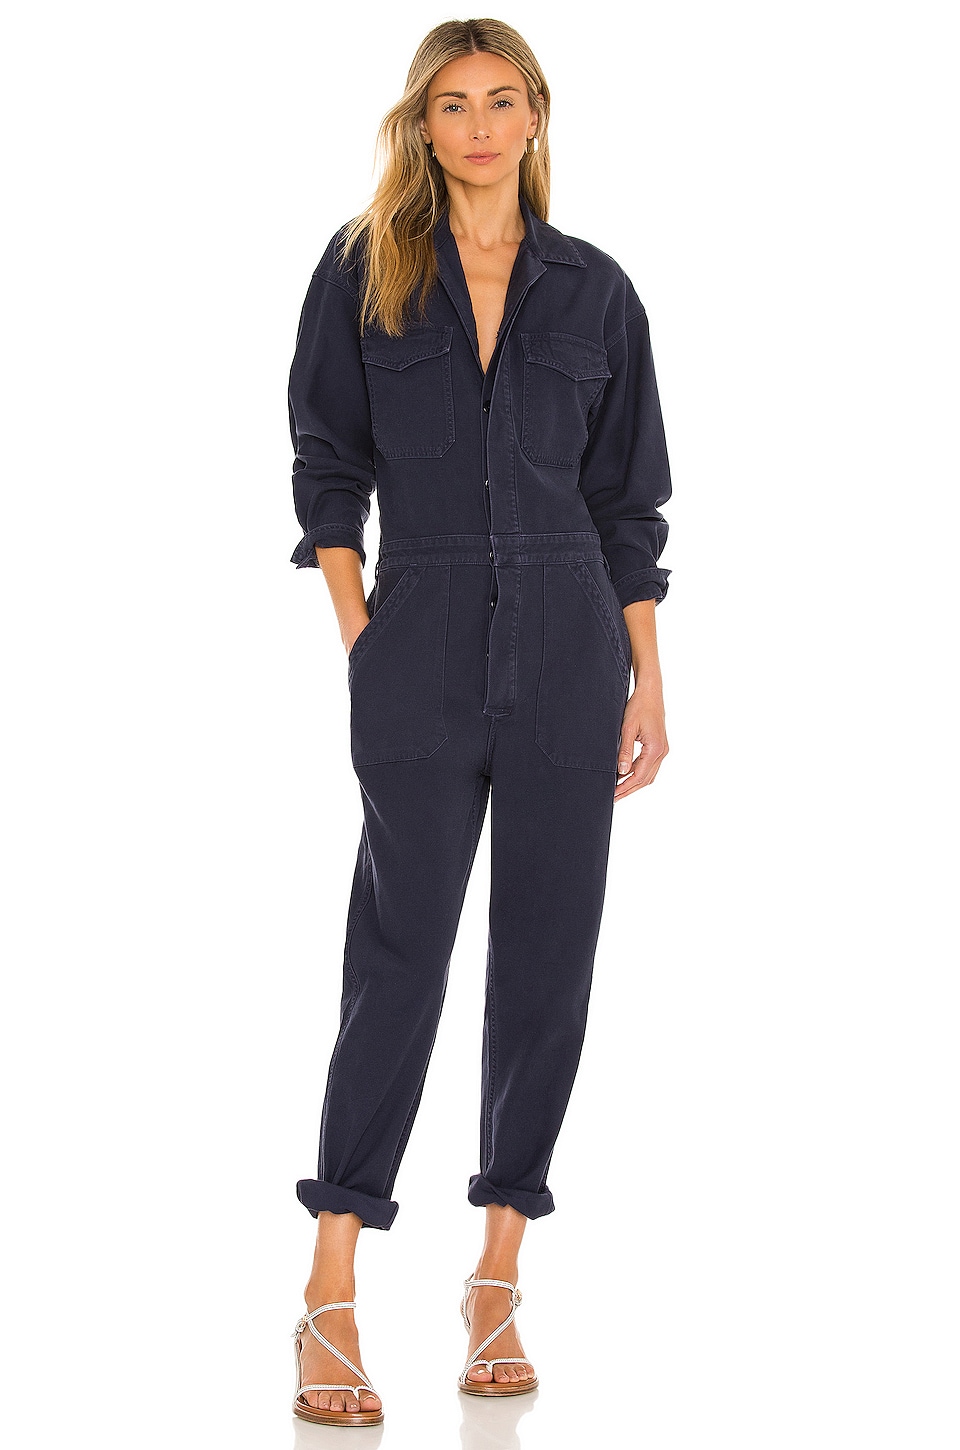 Citizens of Humanity Marta Jumpsuit in Washed Navy | REVOLVE